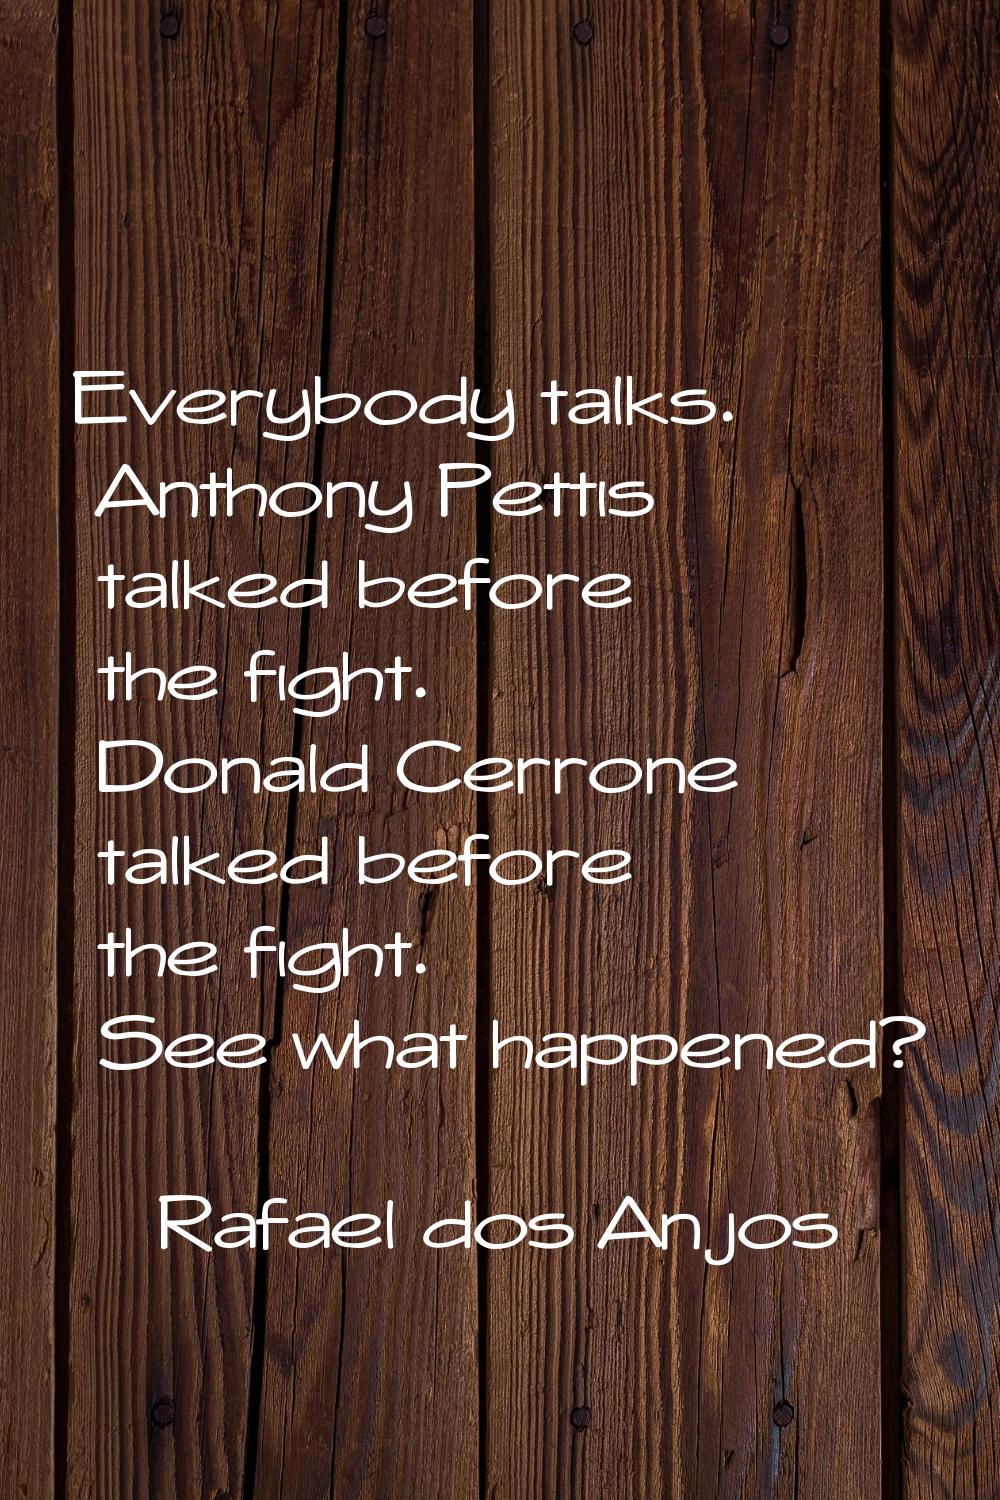 Everybody talks. Anthony Pettis talked before the fight. Donald Cerrone talked before the fight. Se